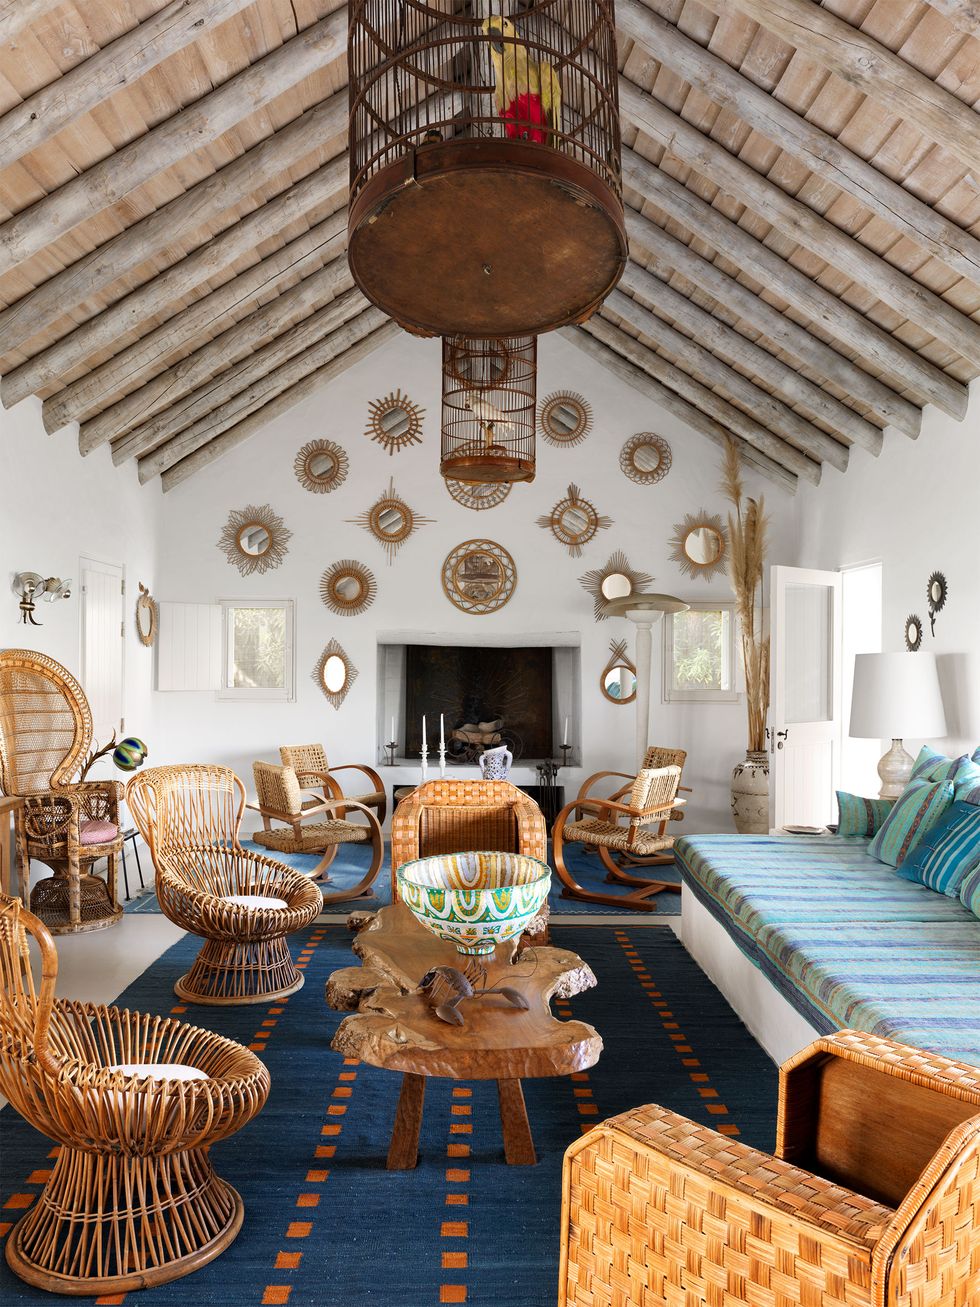 A living room with a birdcage hanging from the diagonal beam ceiling, a fireplace with some straw mirrors on the other side of the wall, wicker chairs, a rustic wooden cocktail table, a striped light blue fabric sofa and a small red square. navy rug